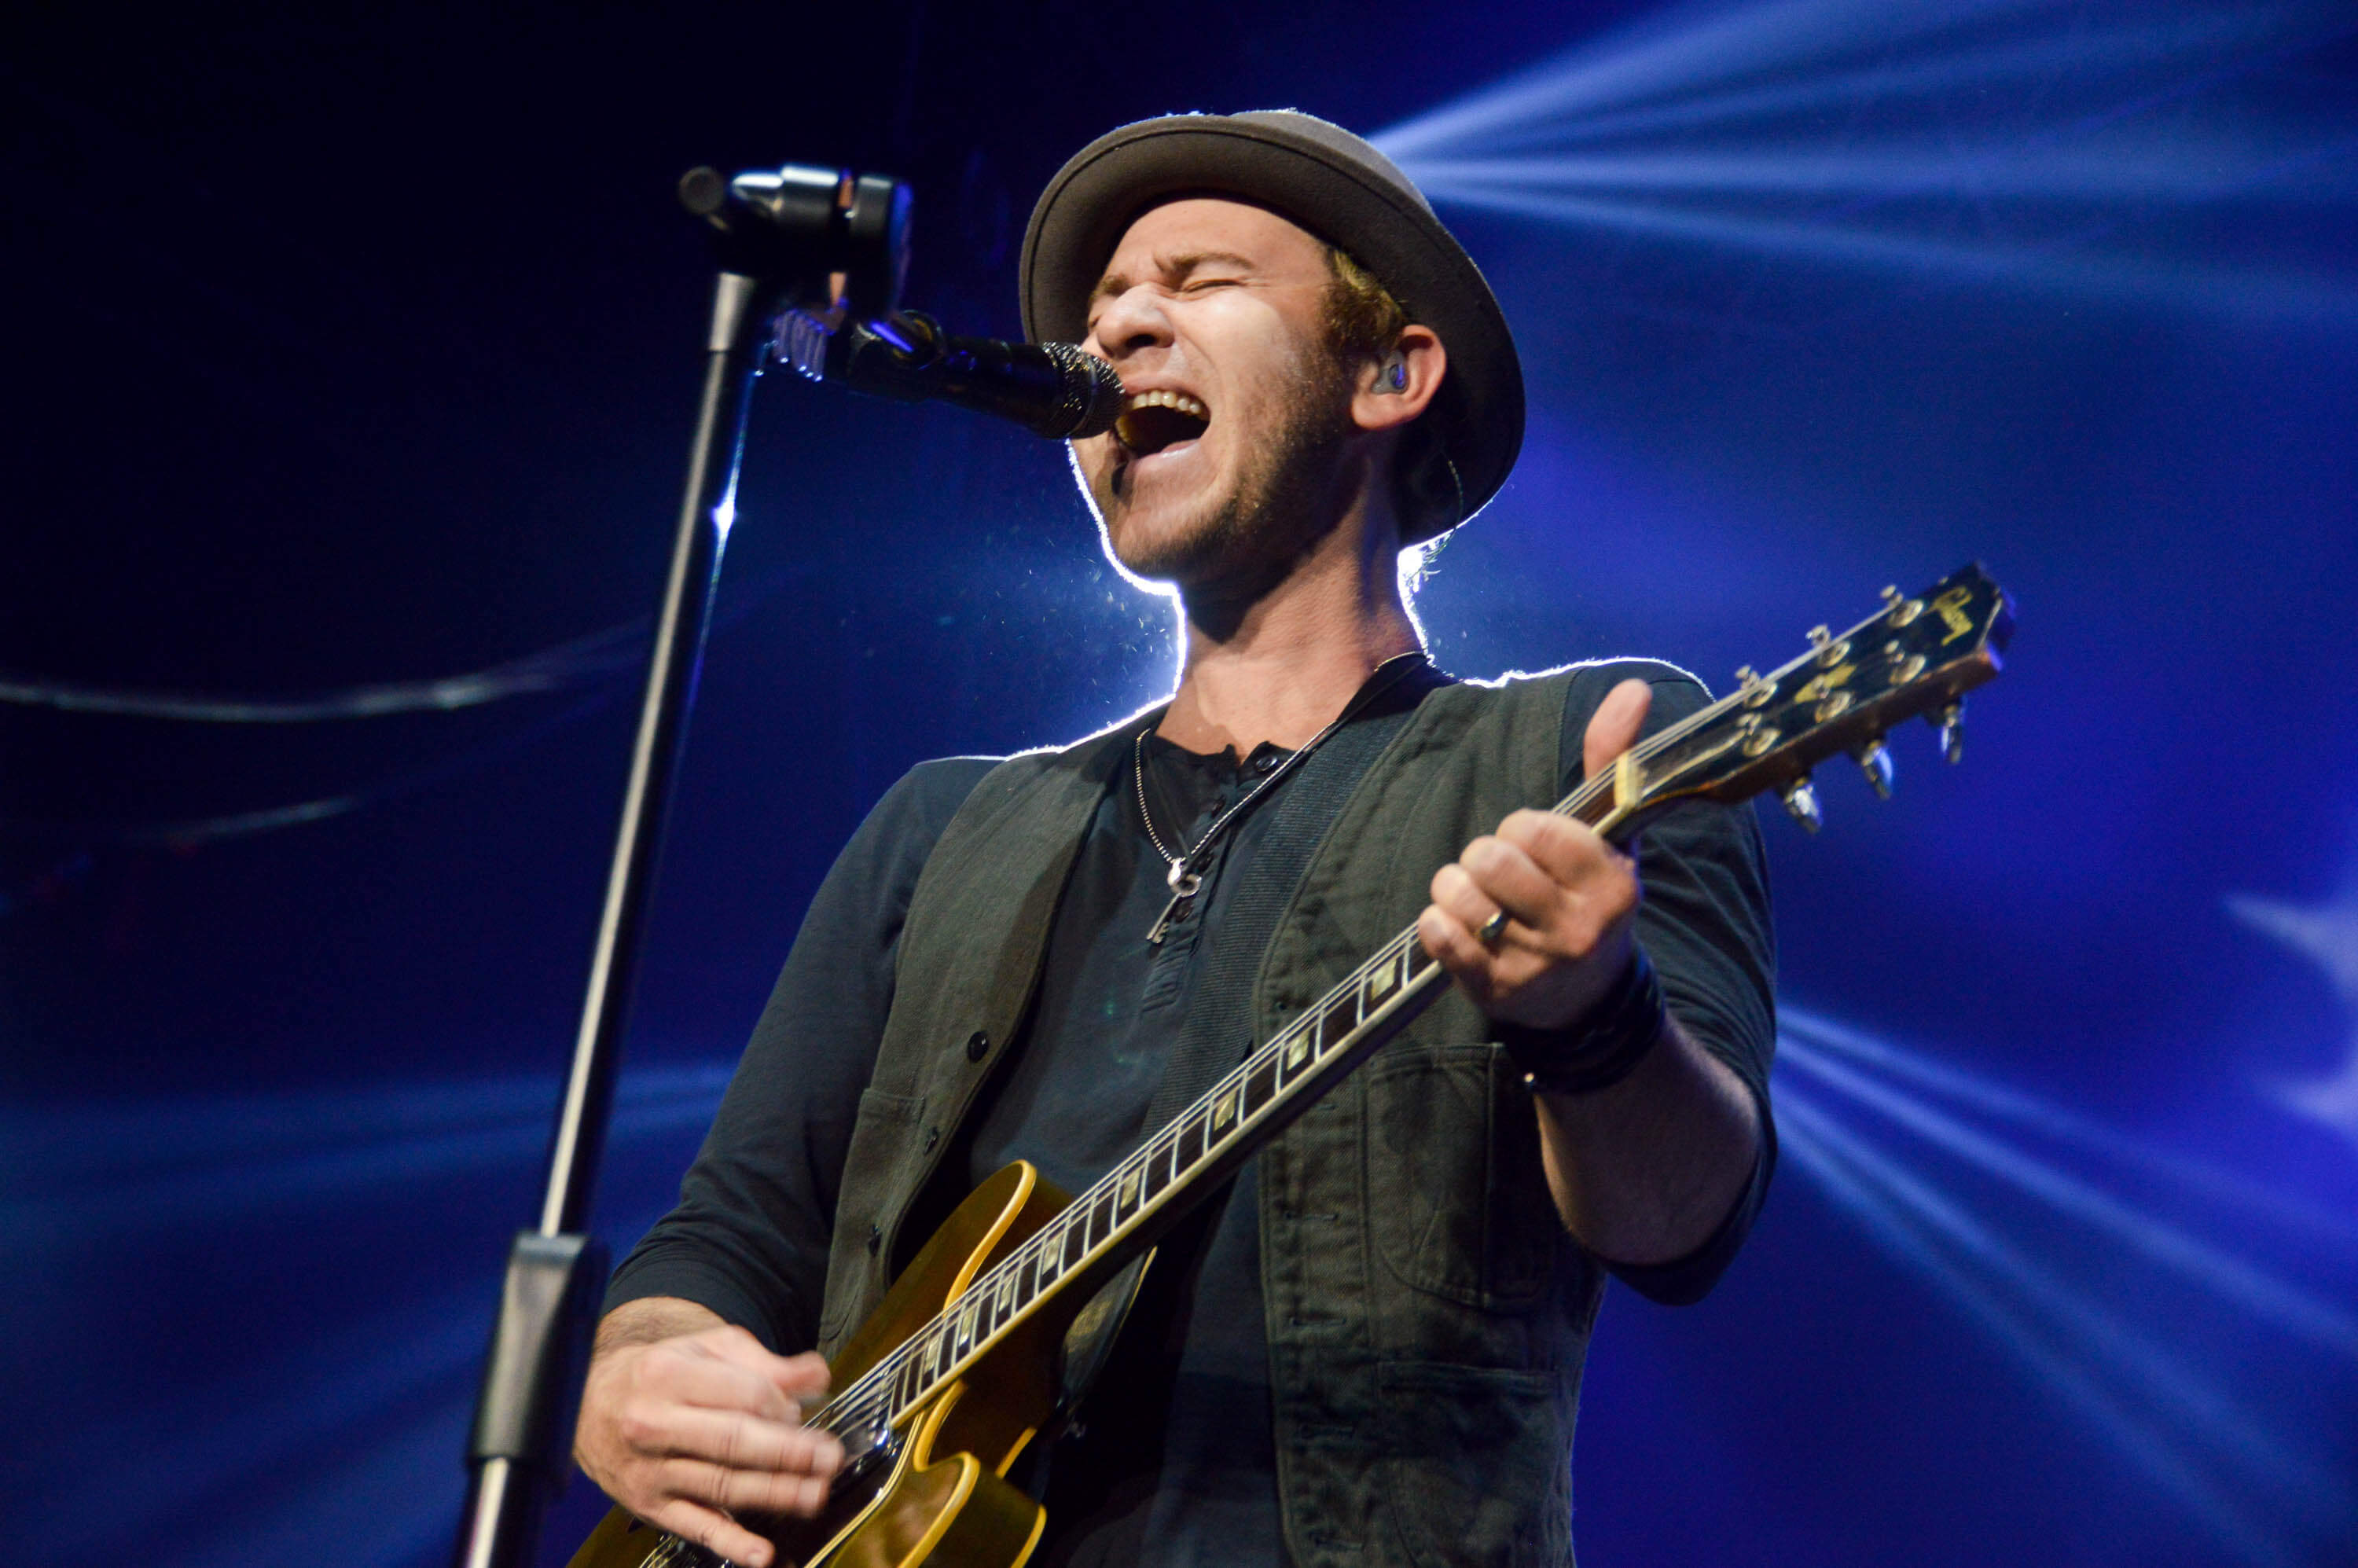 Lifehouse vocalist Jason Wade tells Filipinos: ‘Our favorite place to play in the world is Manila’